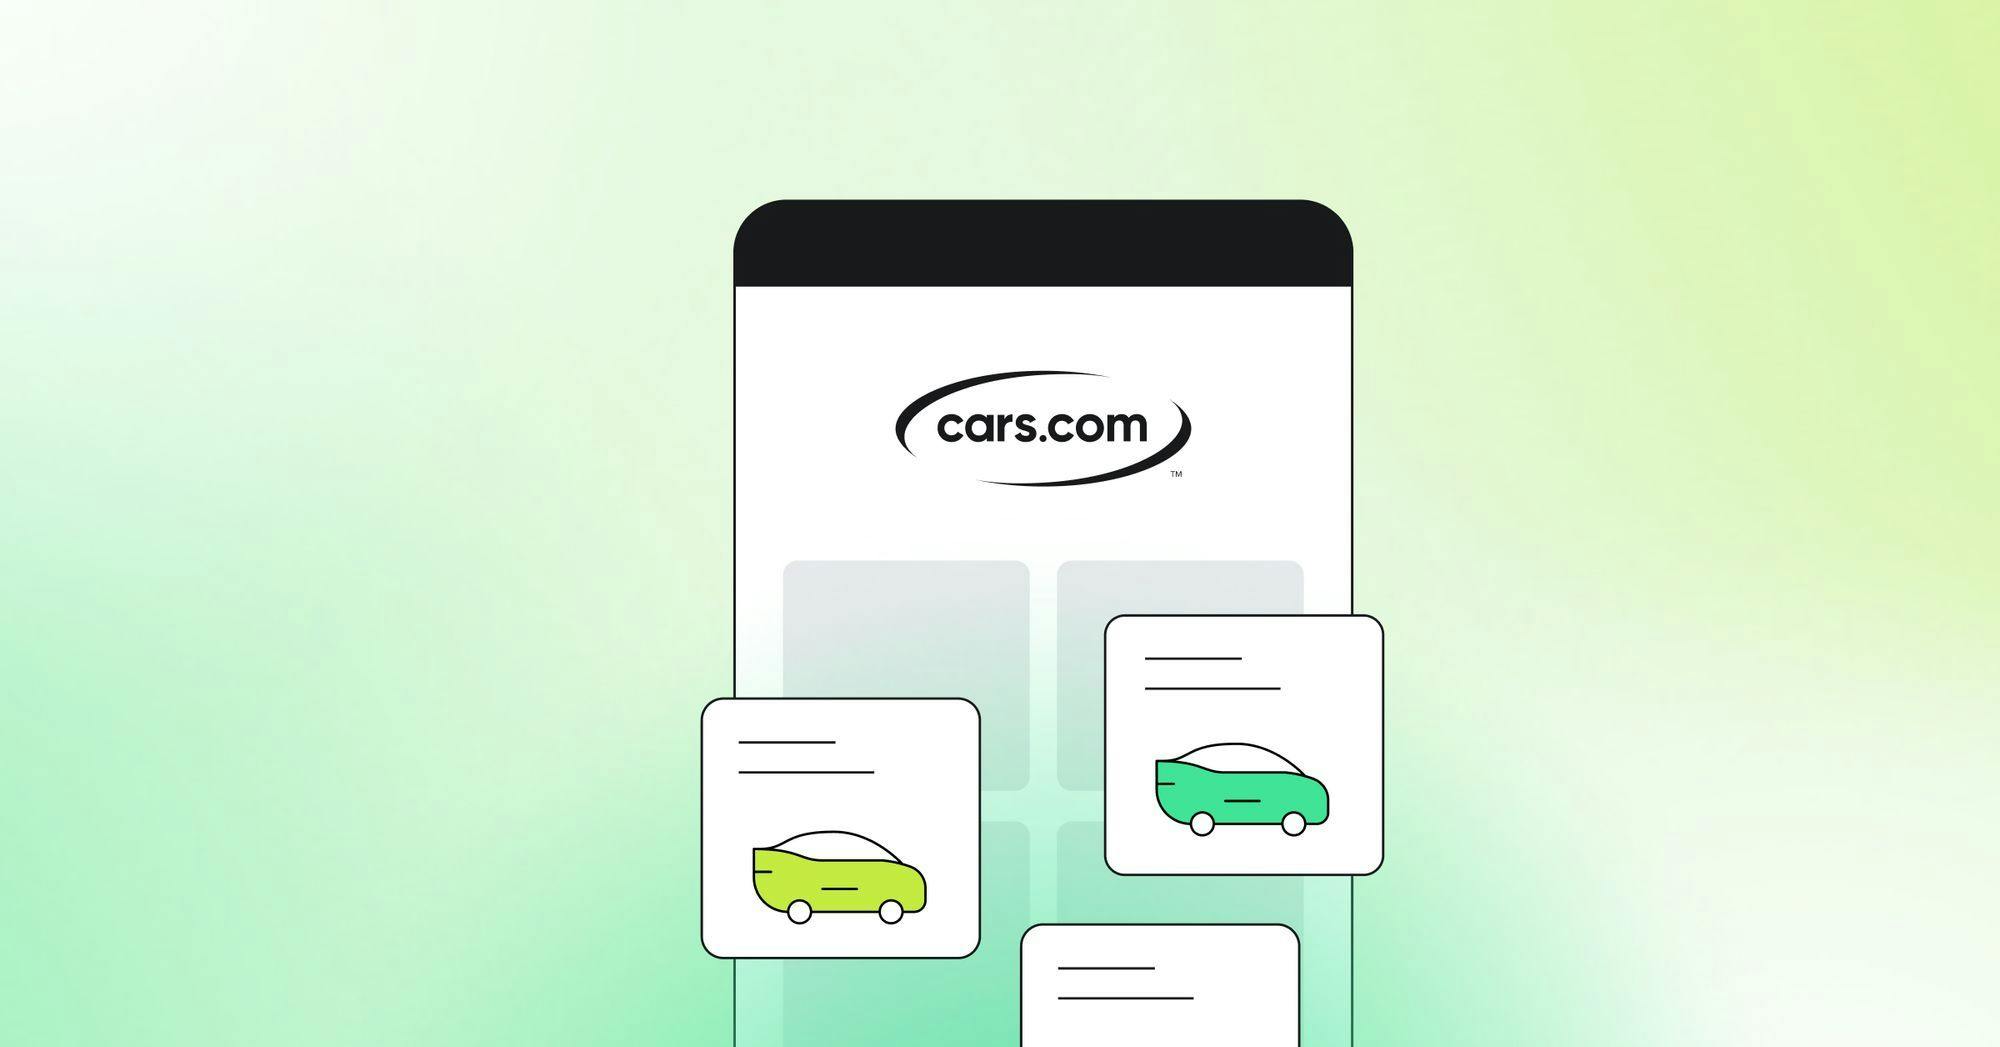 Leveraging Customer Data to Drive Experiences with Cars.com